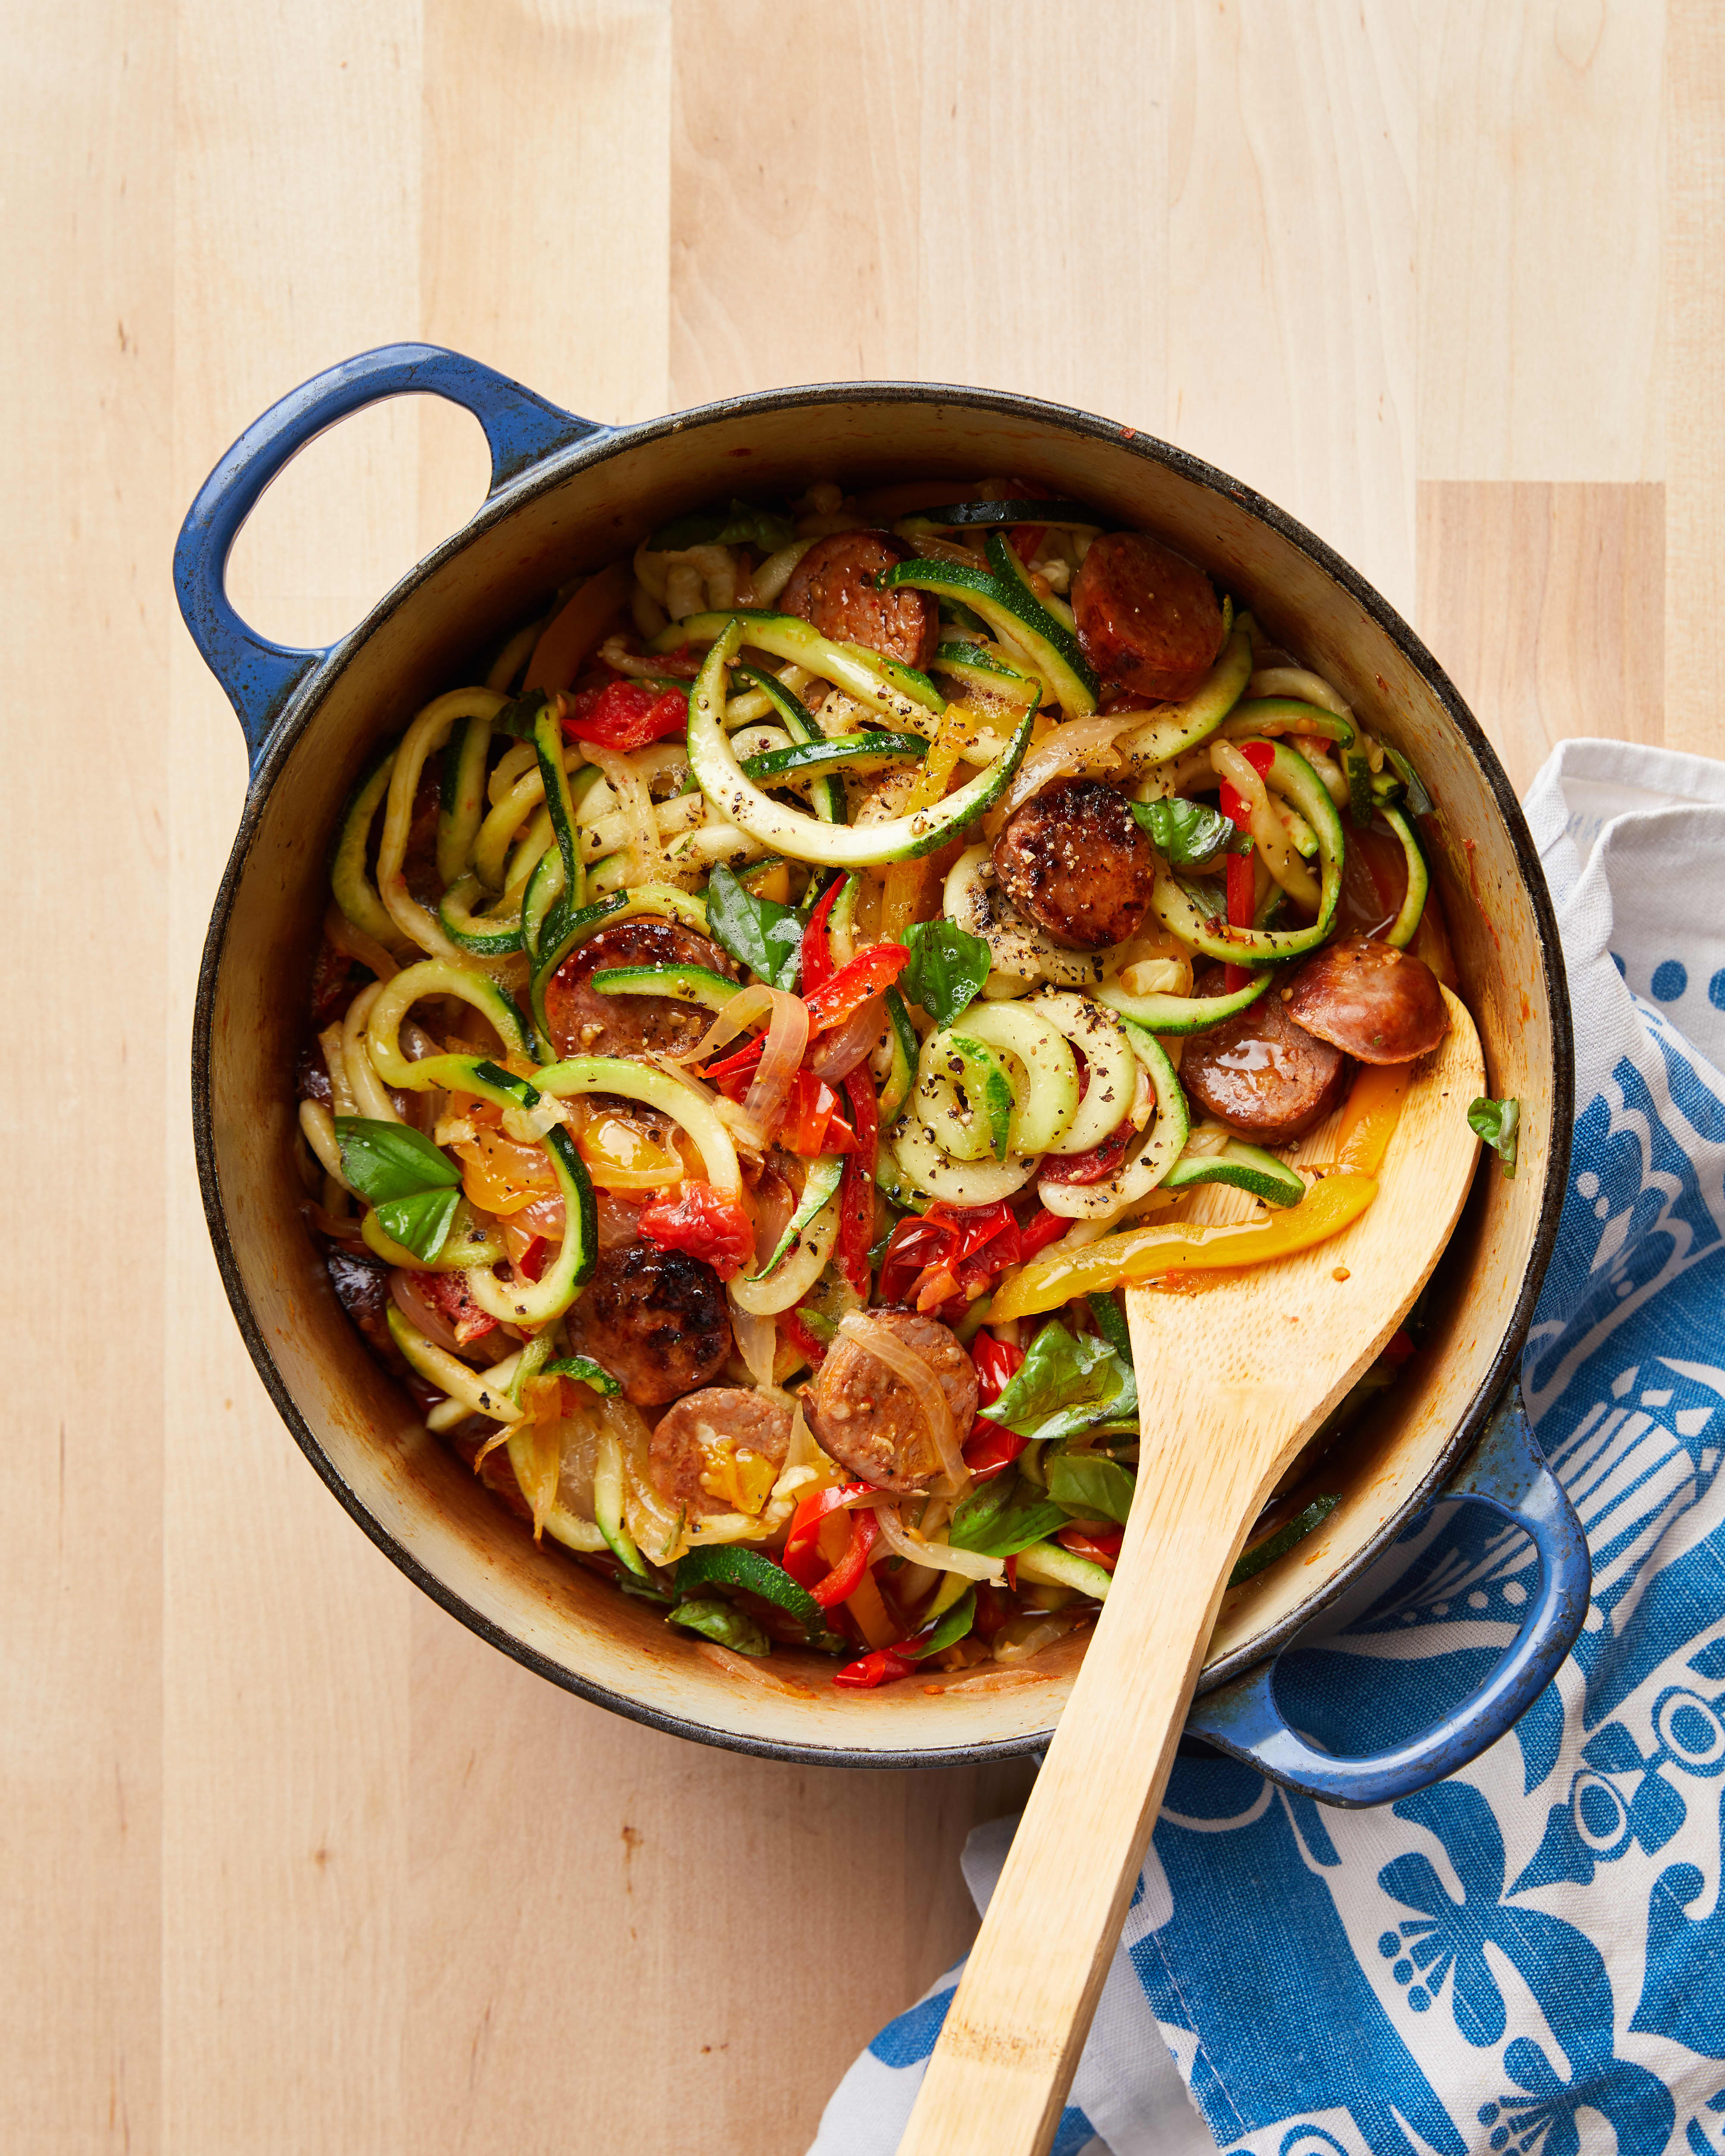 https://cdn.apartmenttherapy.info/image/upload/v1594657520/k/Photo/Recipes/2020-07-Sausage-and-pepper-zoodles/Kitchn_Snapshot_Zucch_SPZoodle_425.jpg